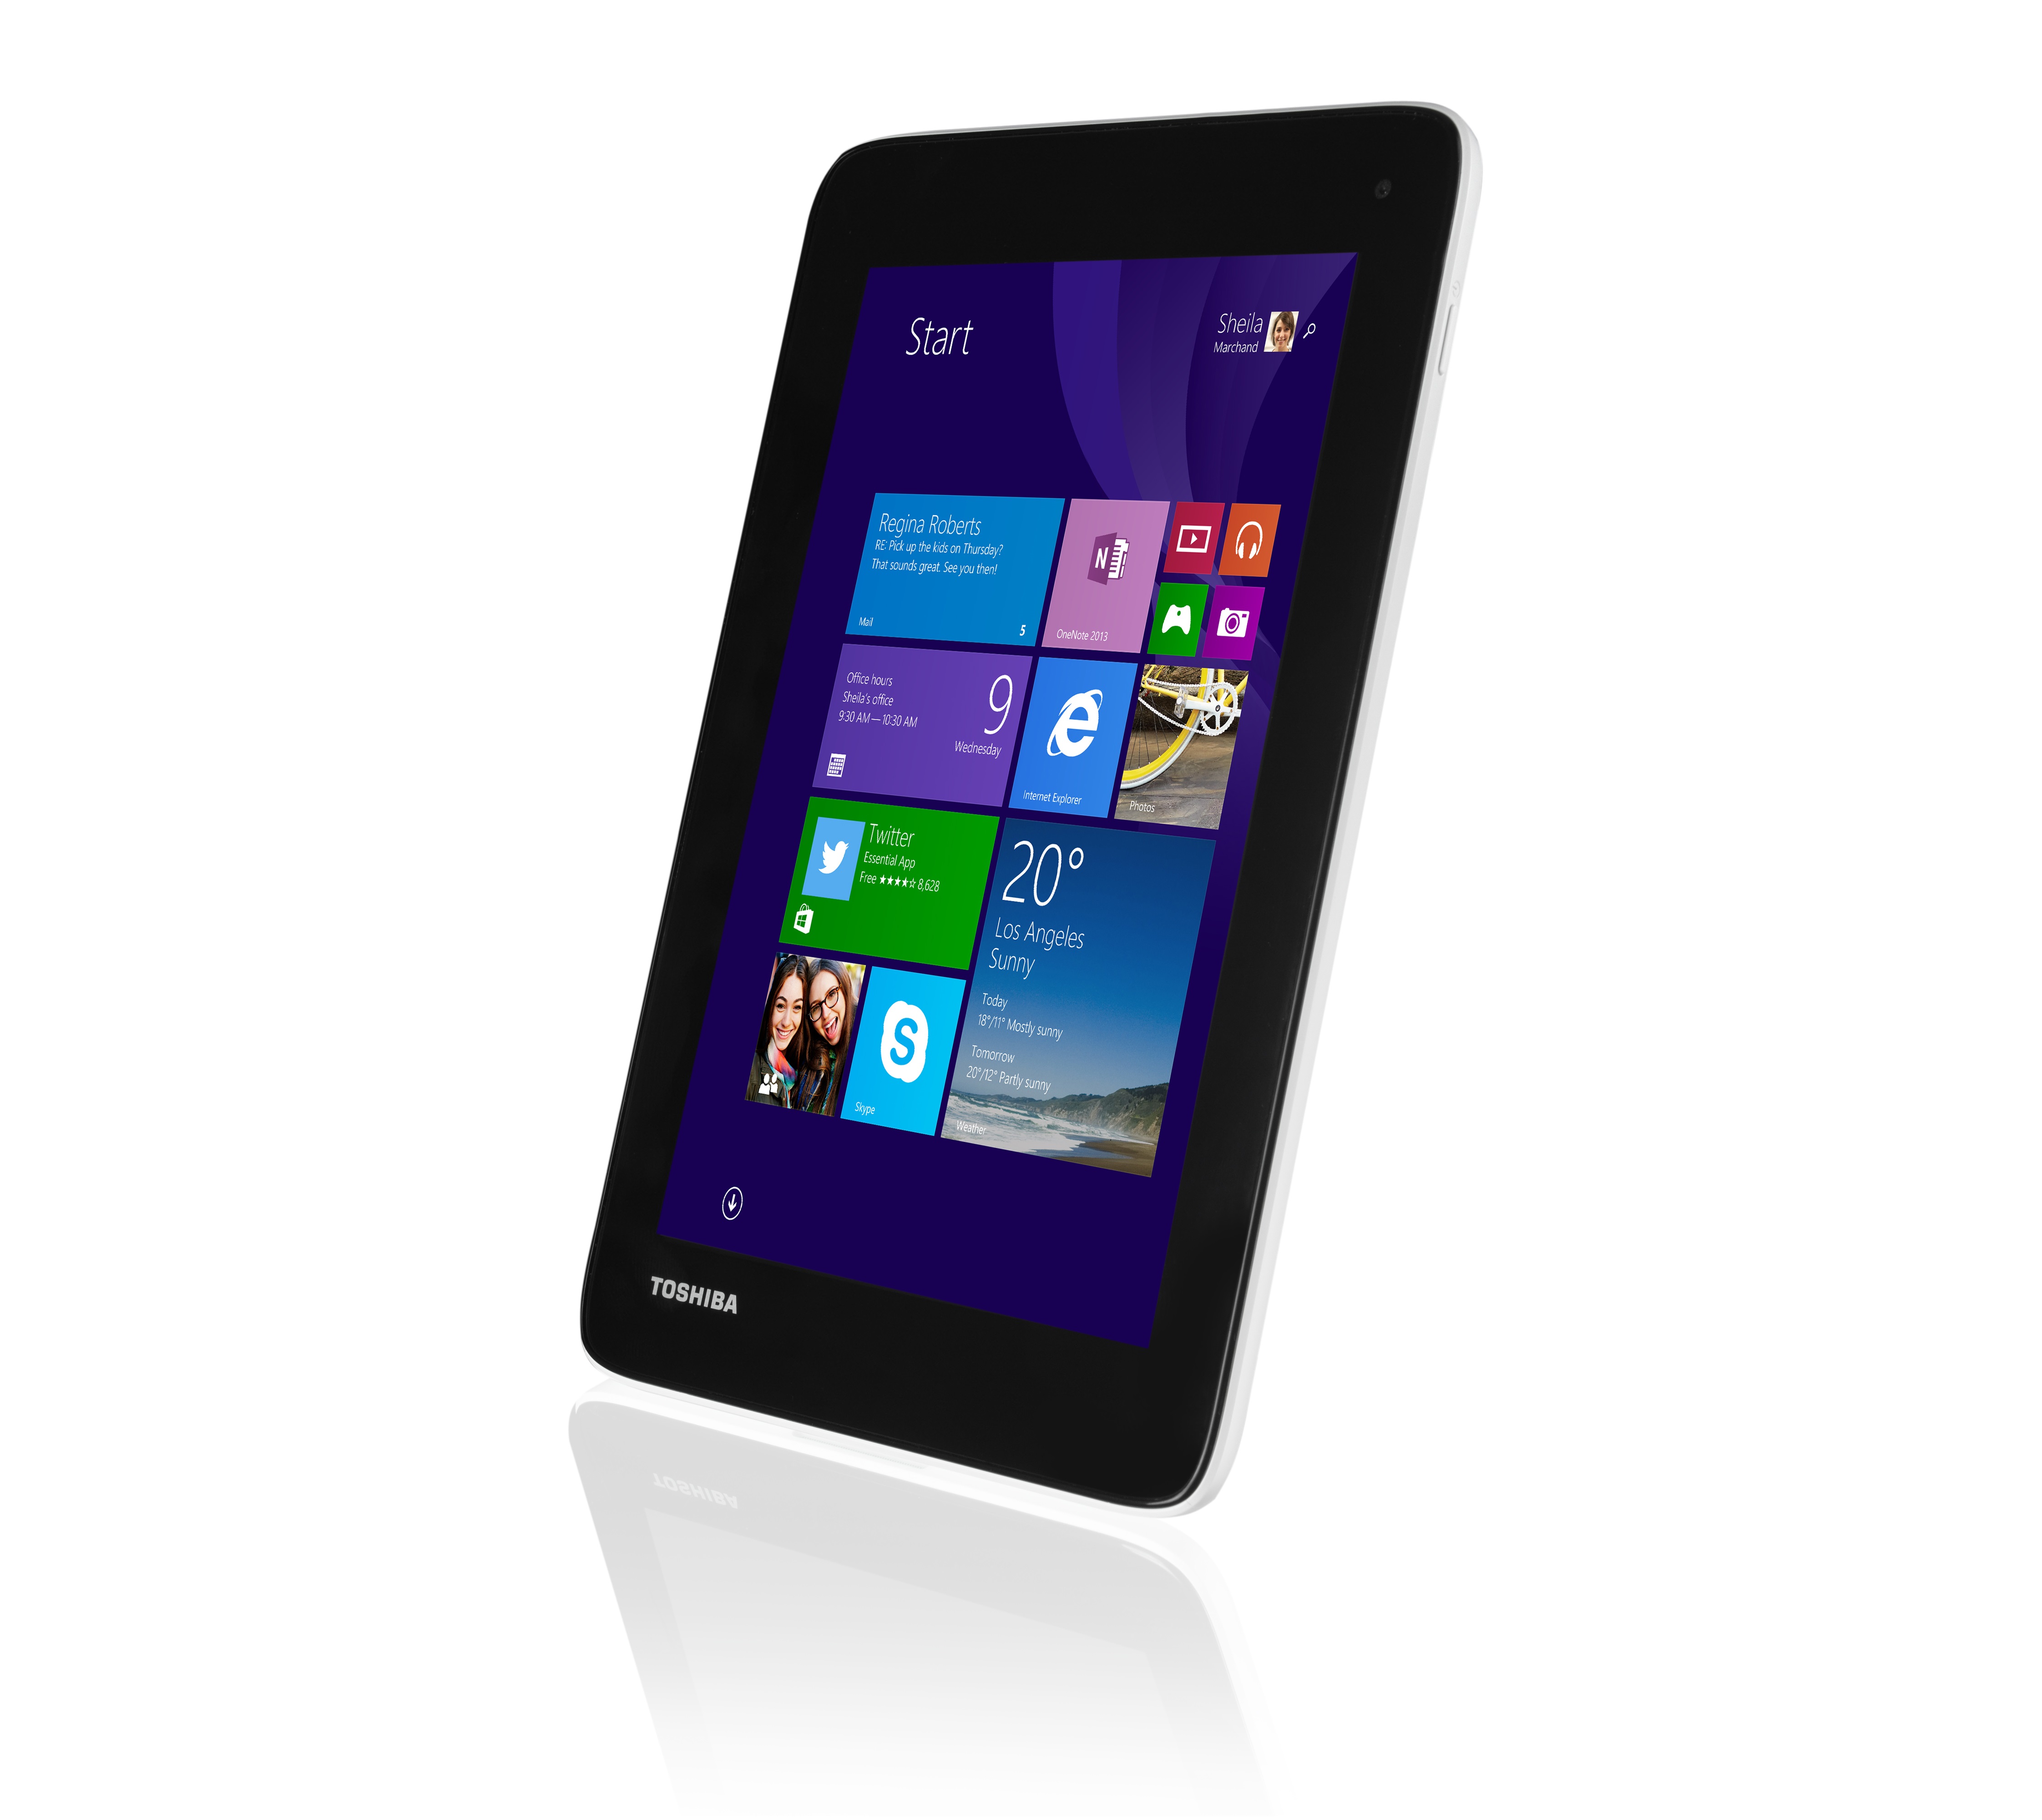 Toshiba launching 7-inch Windows 8.1 tablet with $120 pricetag